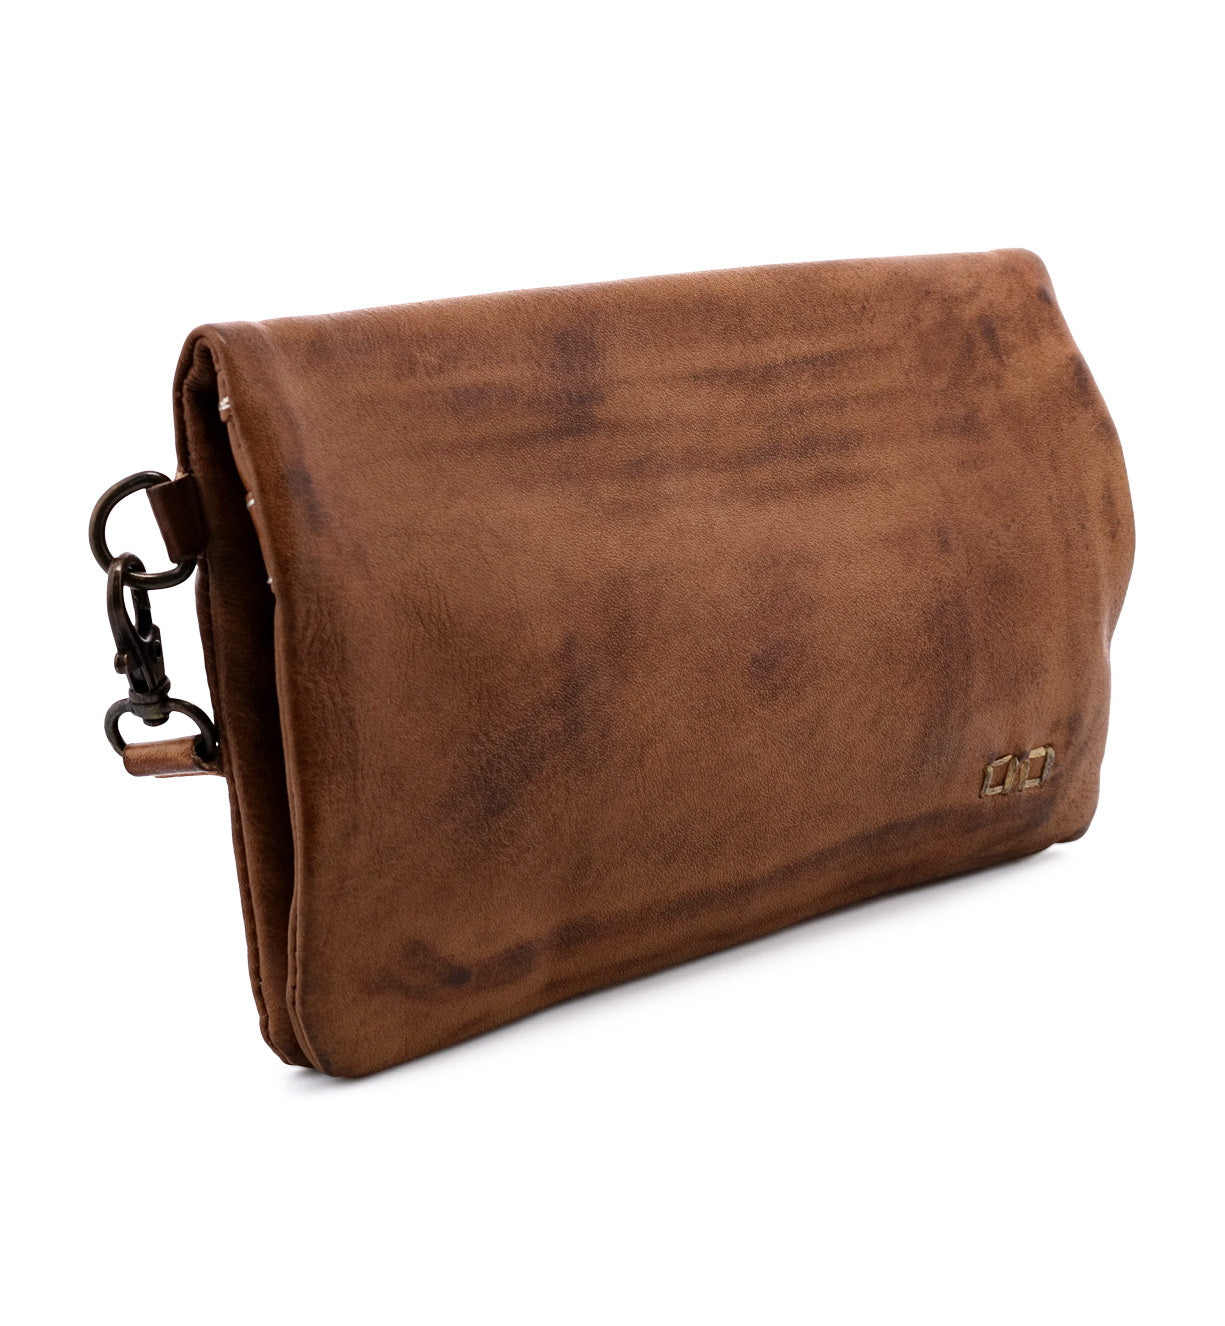 A Cadence tan leather clutch bag by Bed Stu.